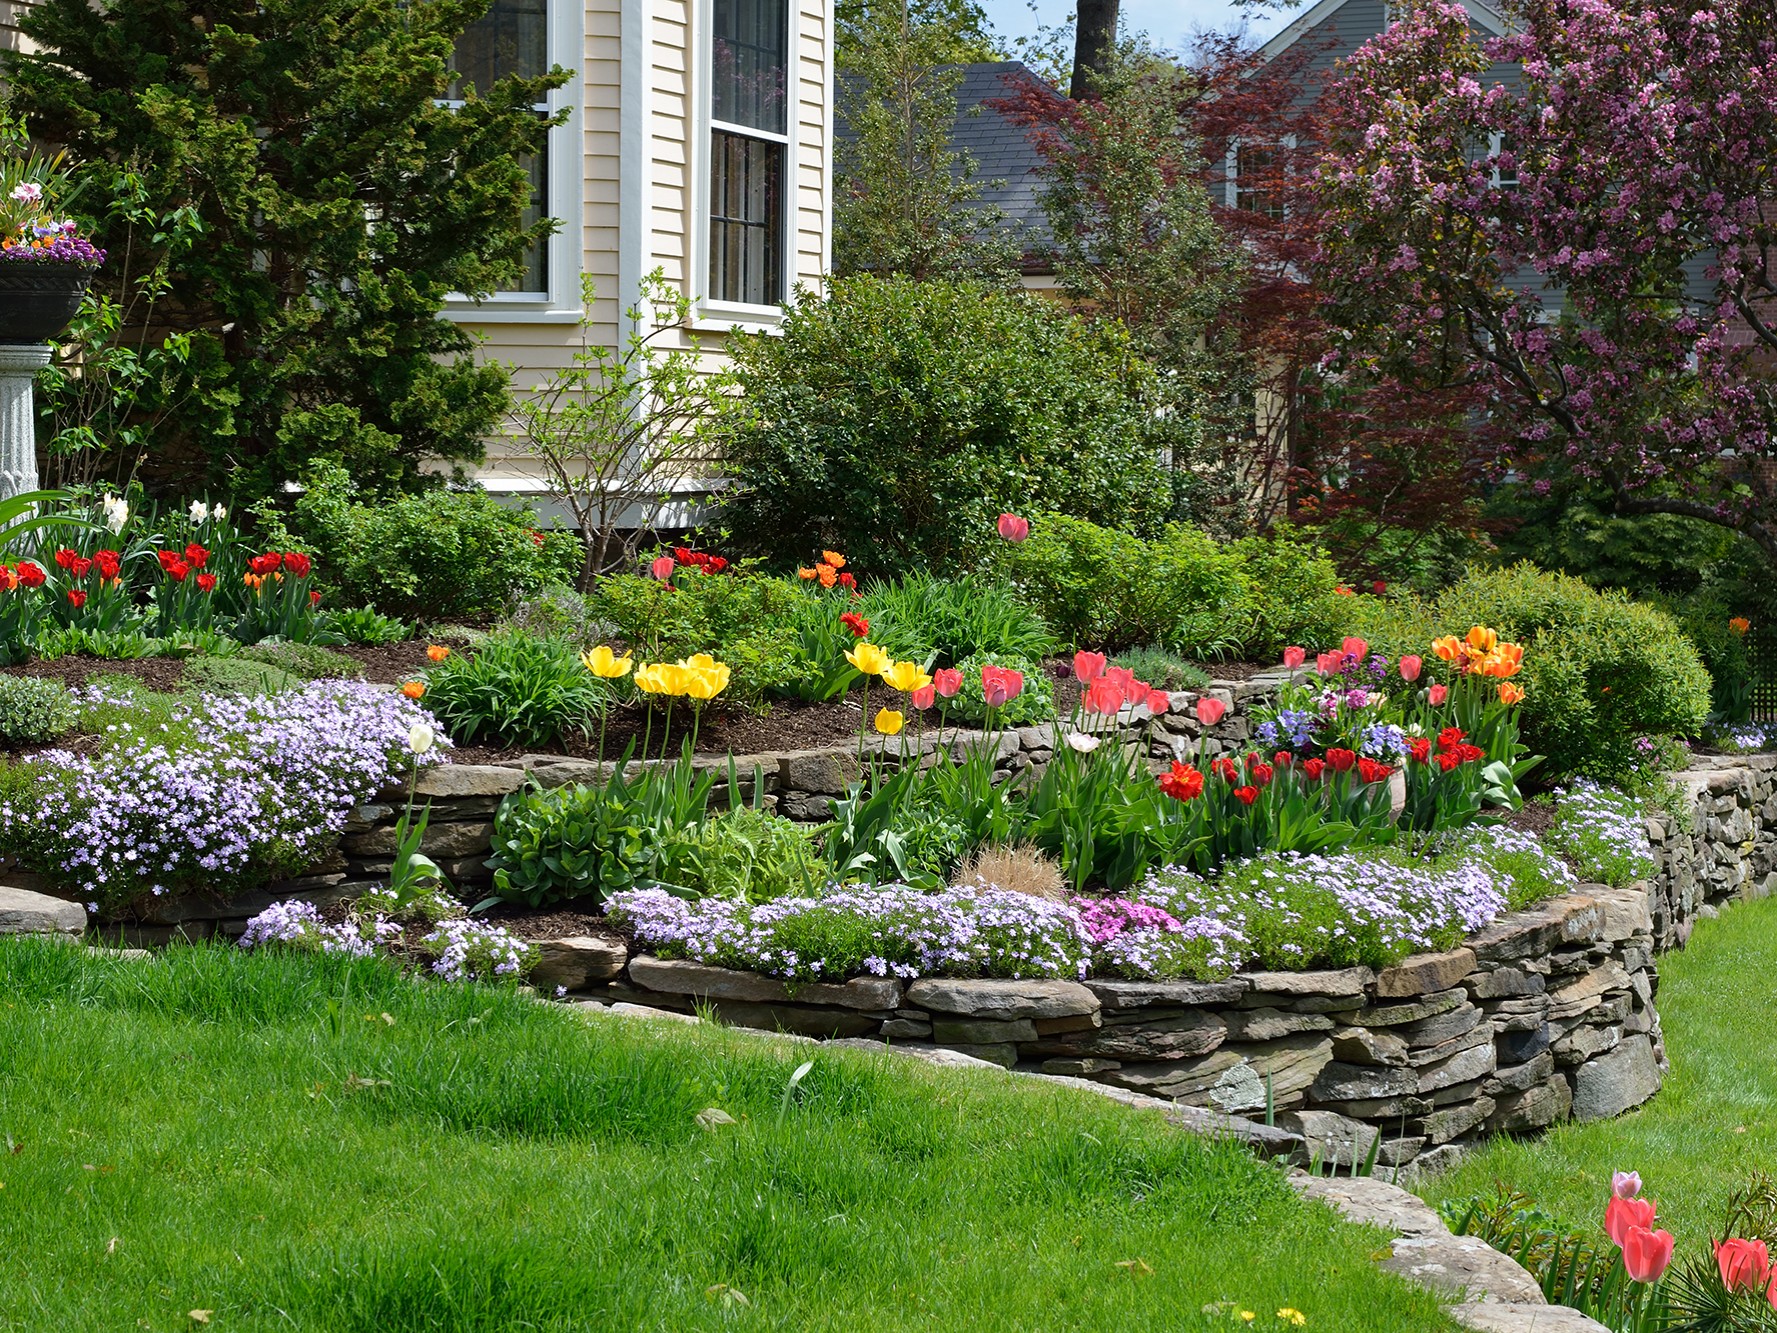 multi-layer paver stone retaining wall filled with fresh flowers and mulch. hardscaping service by bret-mar